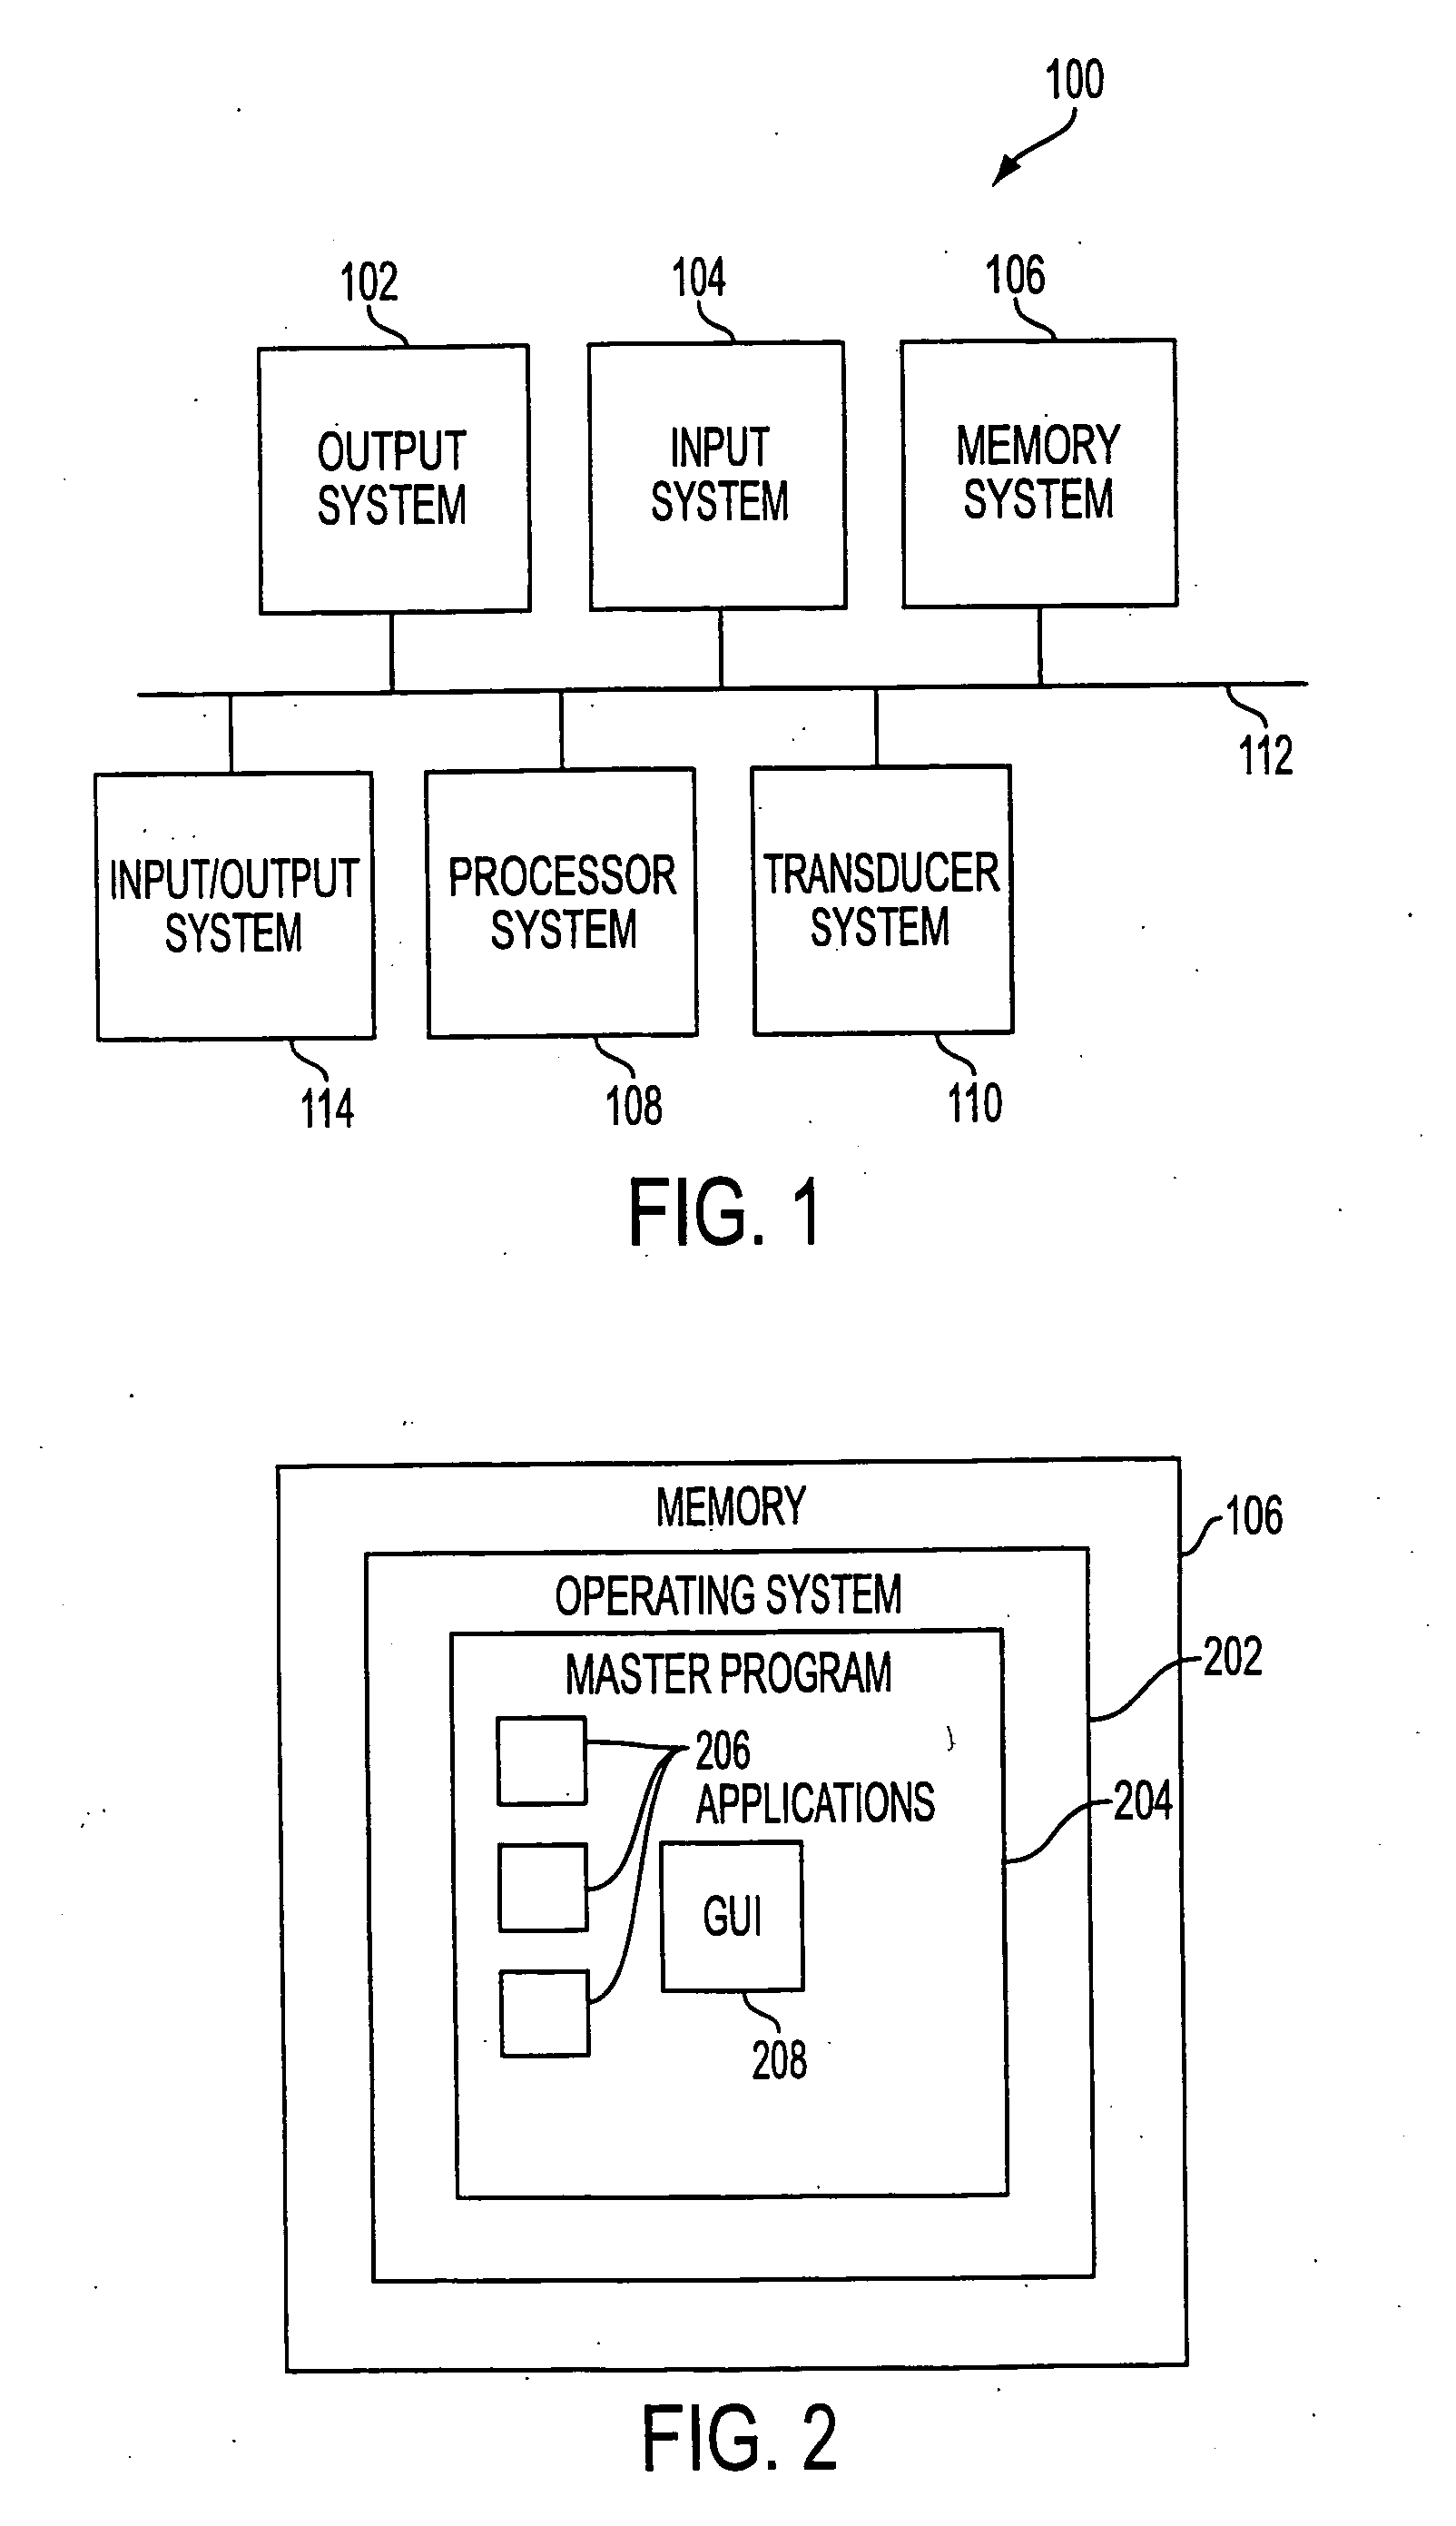 User interface for handheld imaging devices